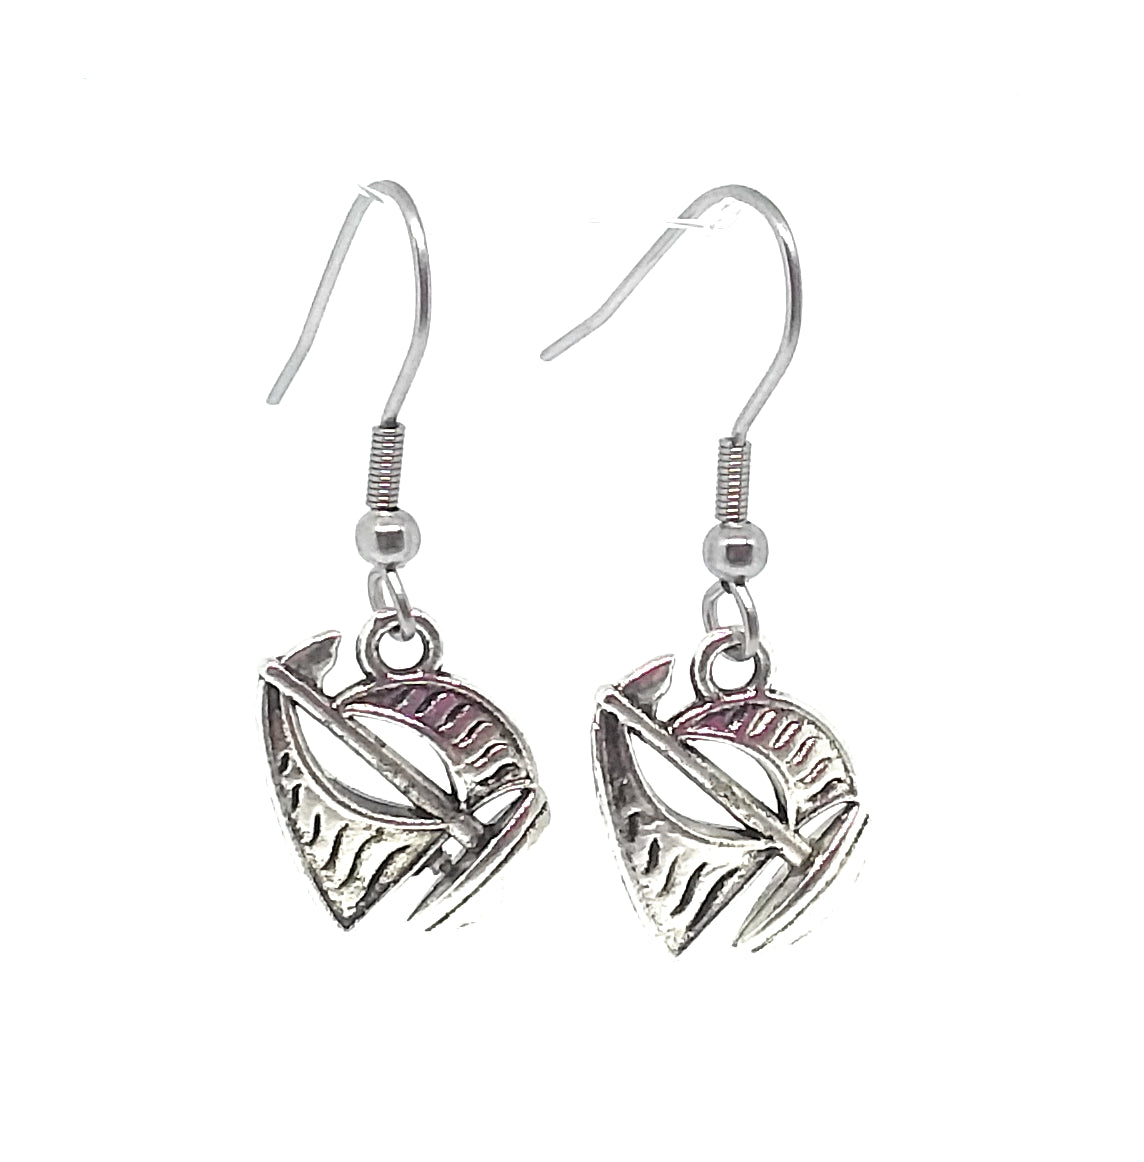 Sail Boat Charm Dangle Earrings with Stainless Steel Ear Wires